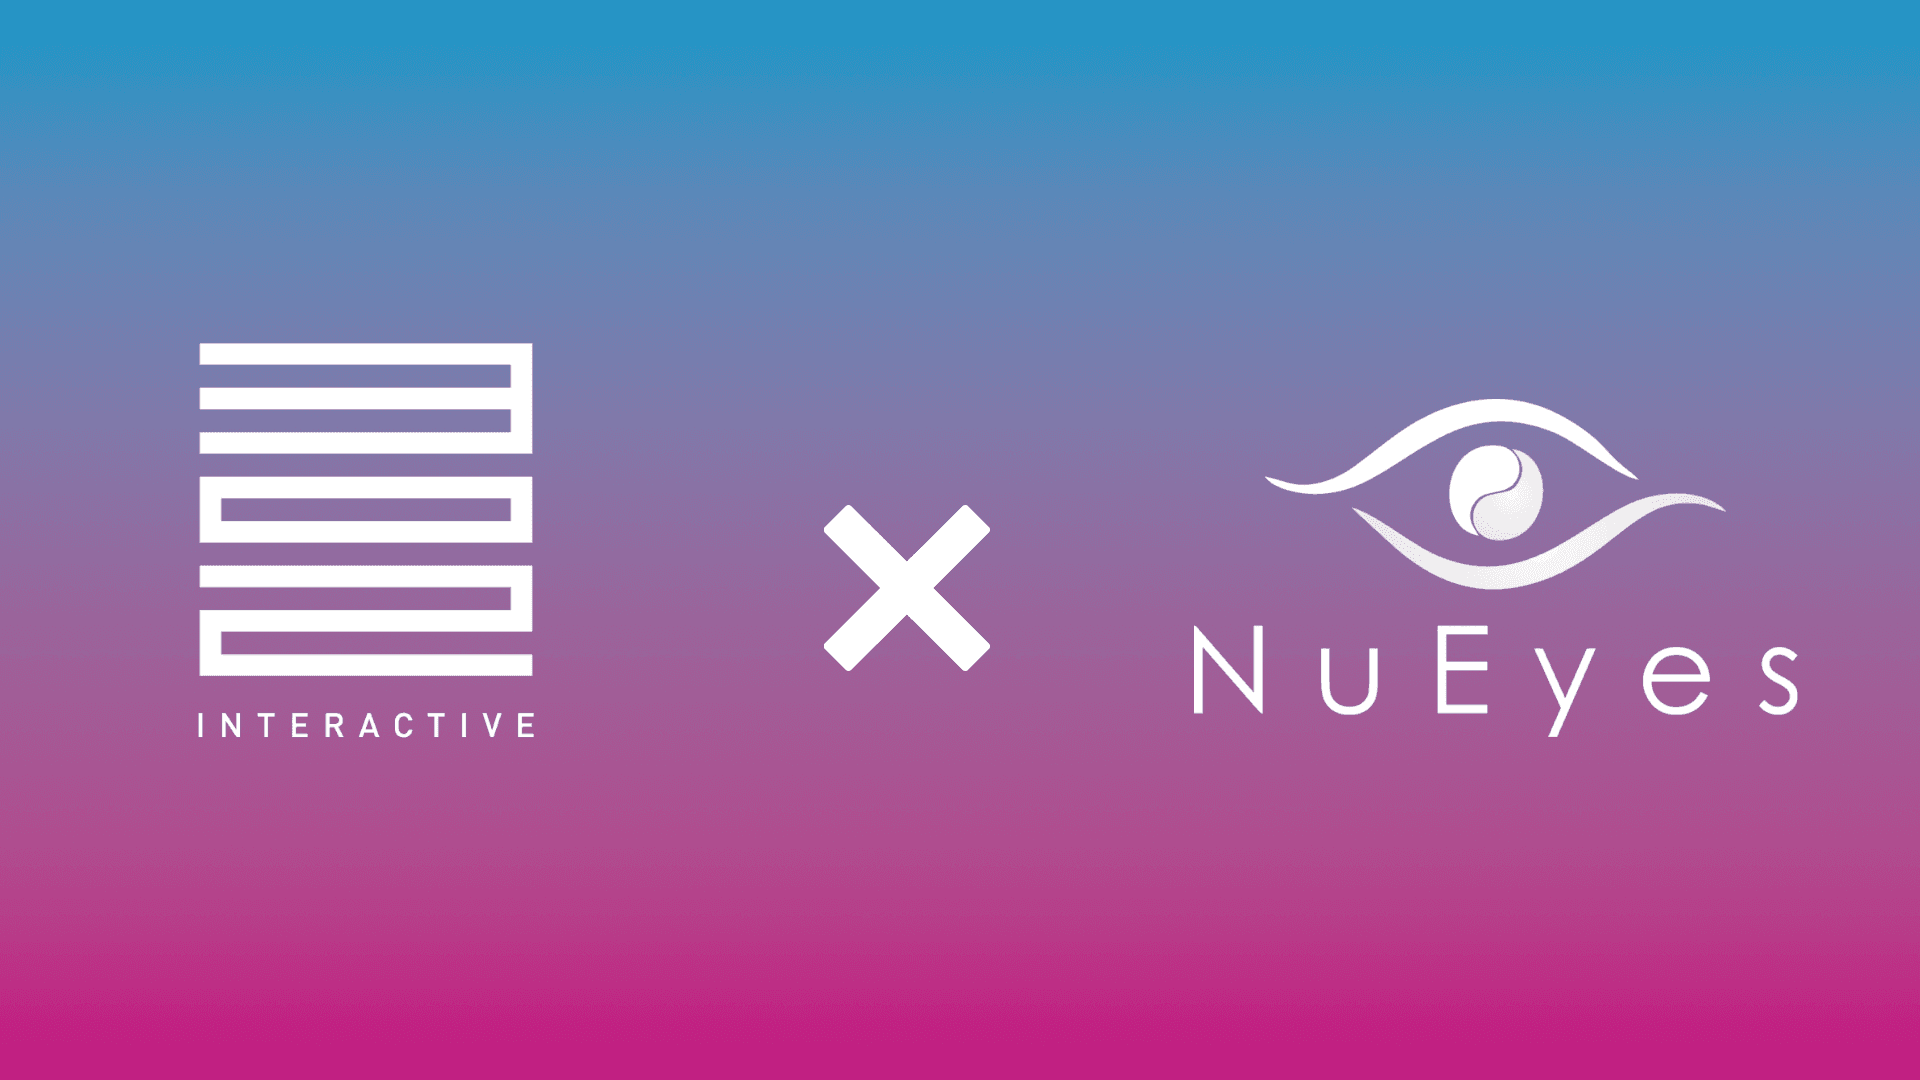 Product 
    
    NuEyes, 302 Interactive to Build Development Tools That Enable Content Creators, Devs to Build Next Generation of Smart Glasses AR Applications
  
   image